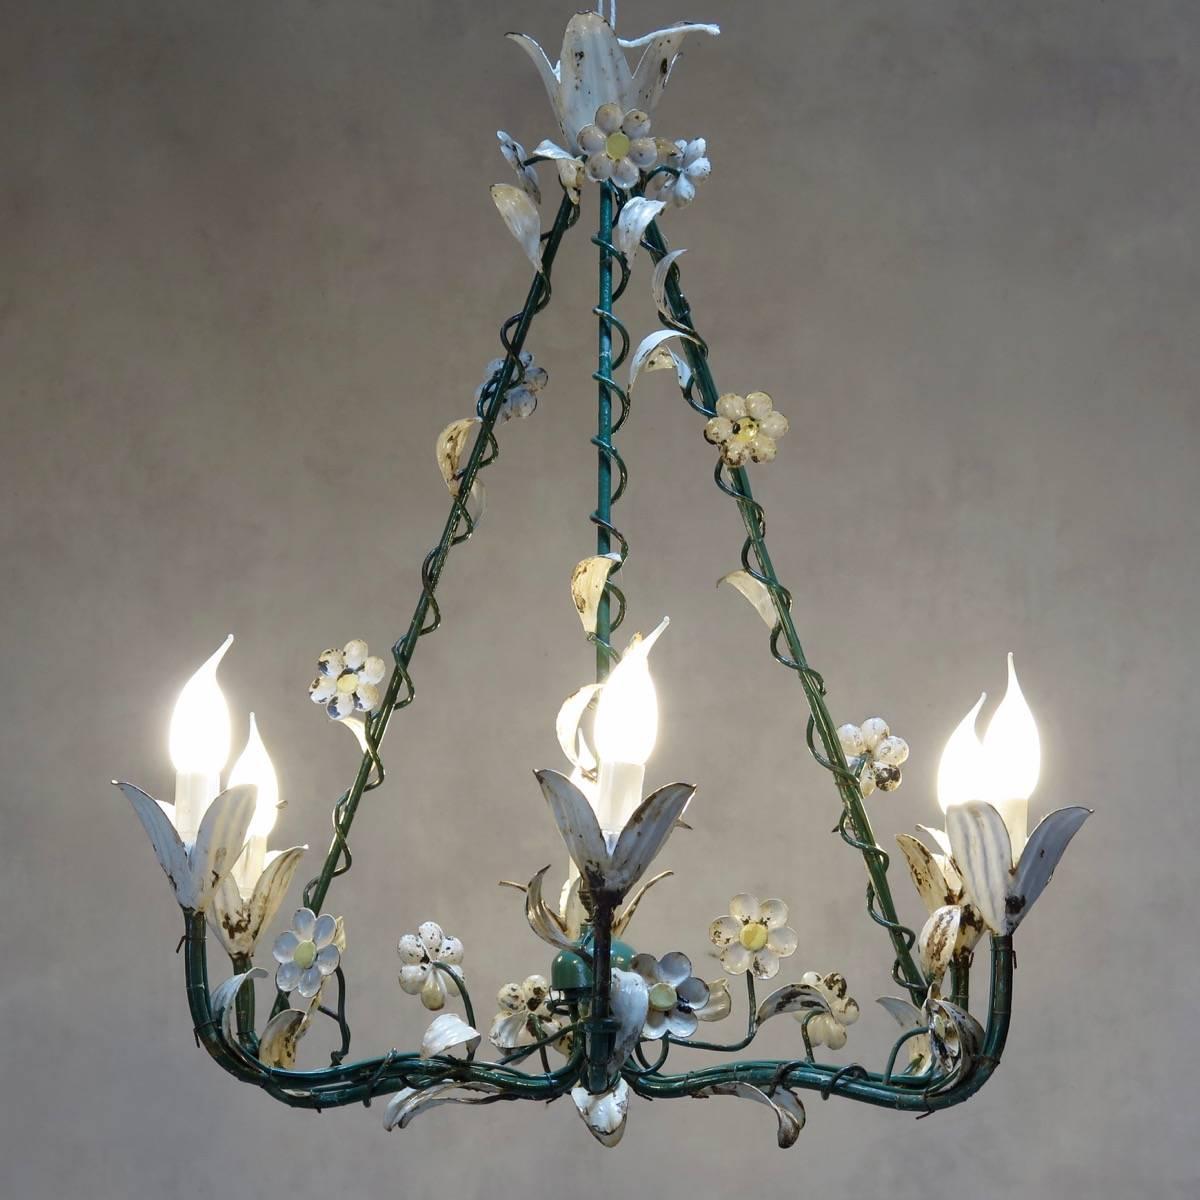 Charming 1940s painted iron chandelier with six lights. Decorated with climbing, vine-like foliage, daisies and lillies.